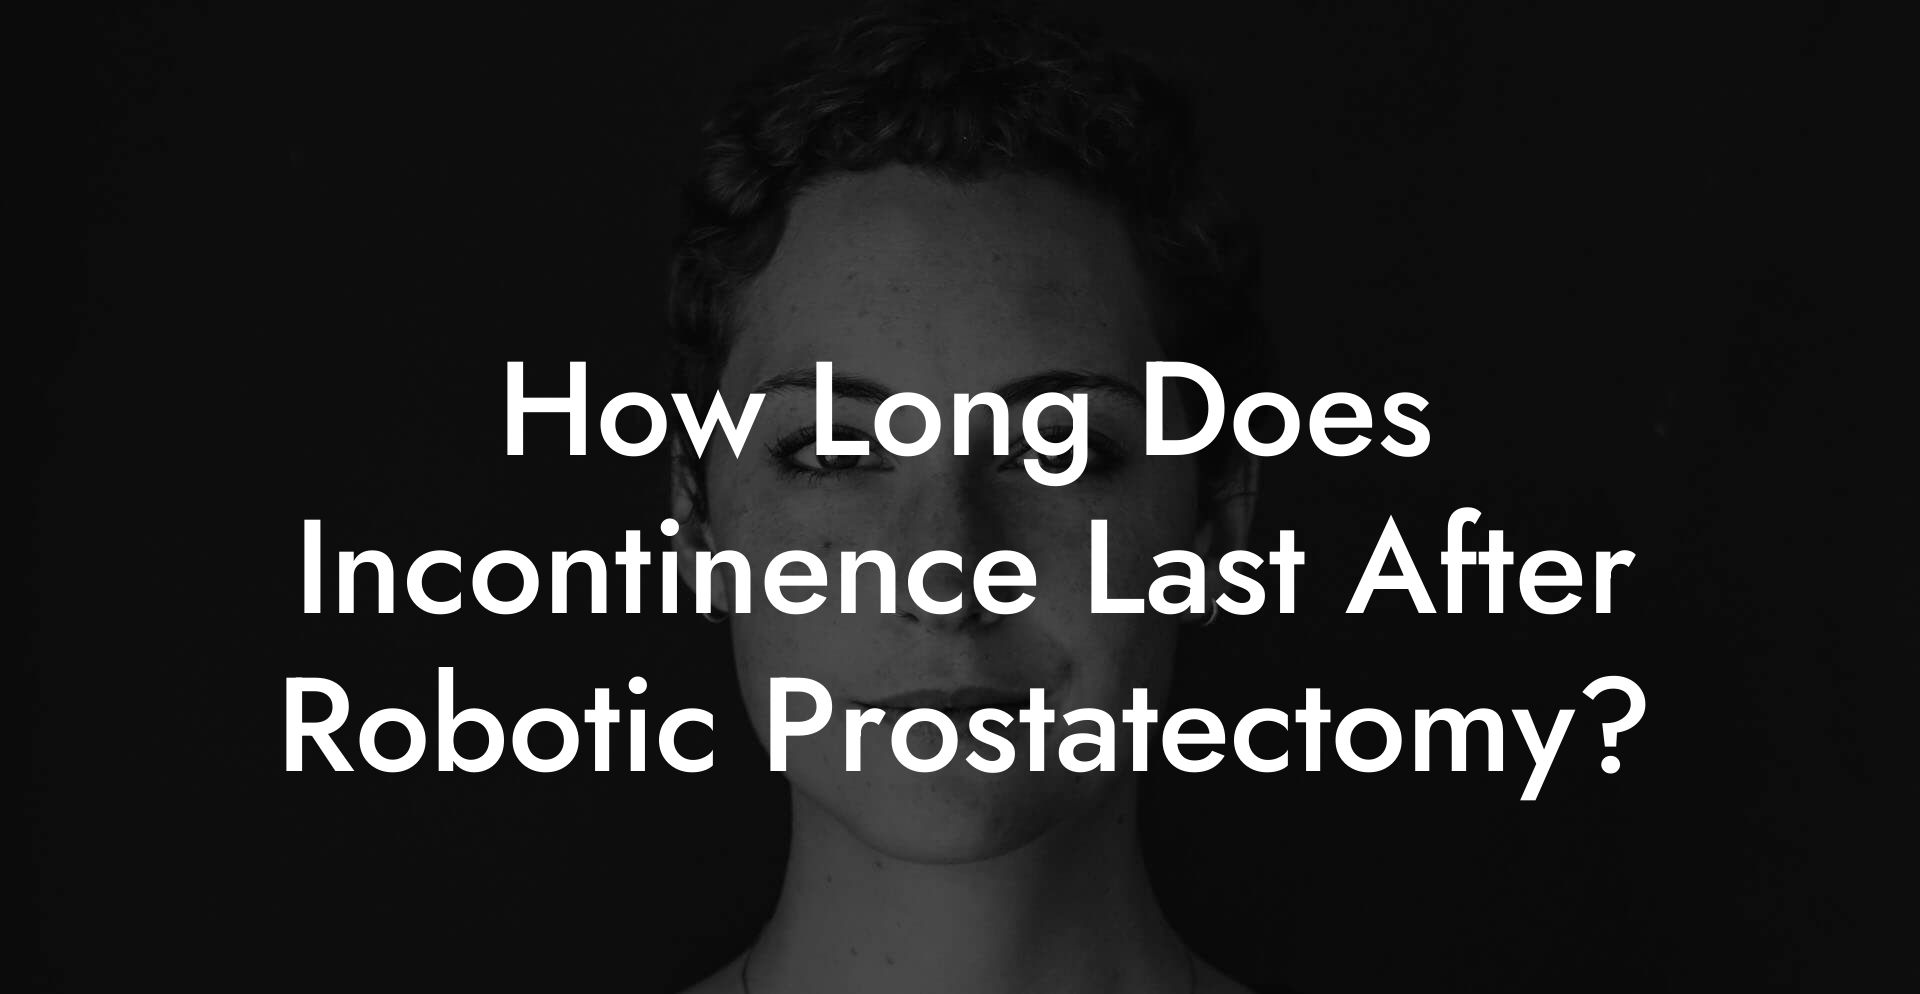 How Long Does Incontinence Last After Robotic Prostatectomy?